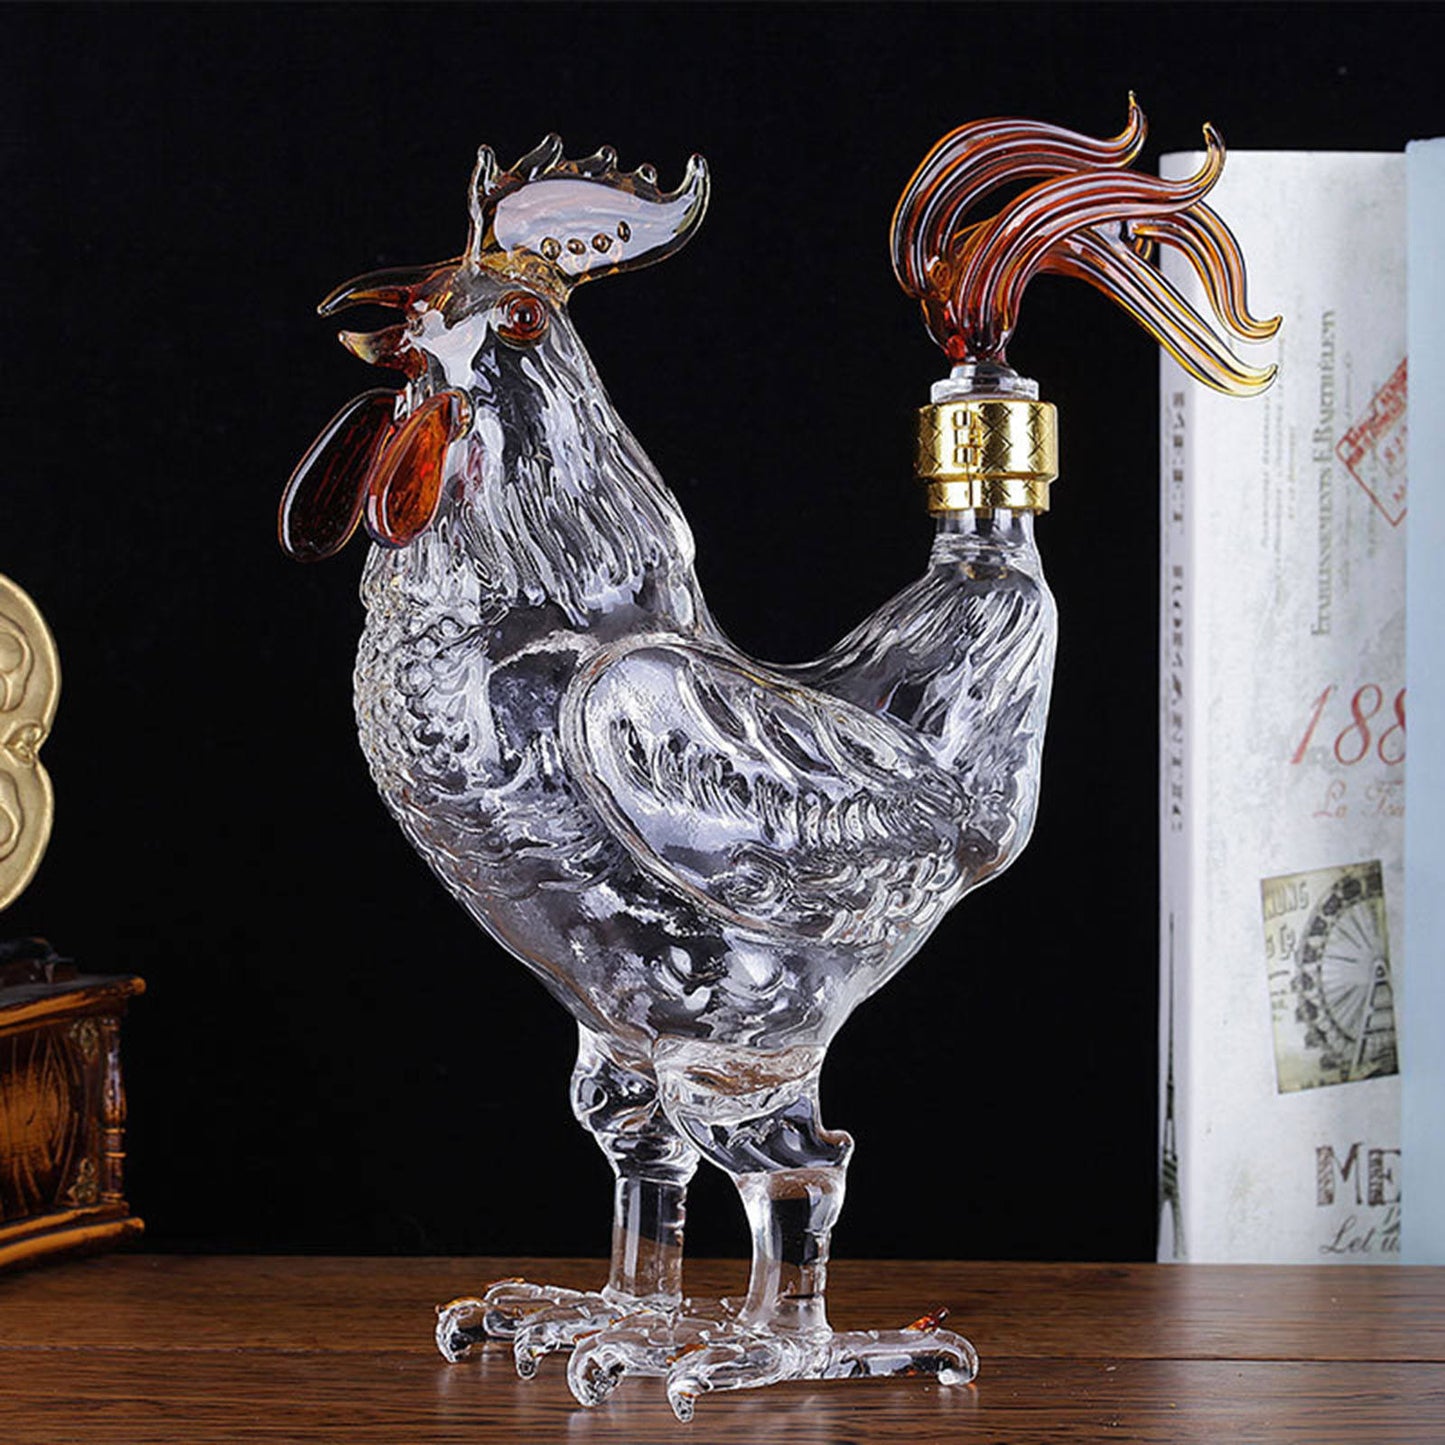 Elegant rooster-shaped whiskey decanter by Glasscias